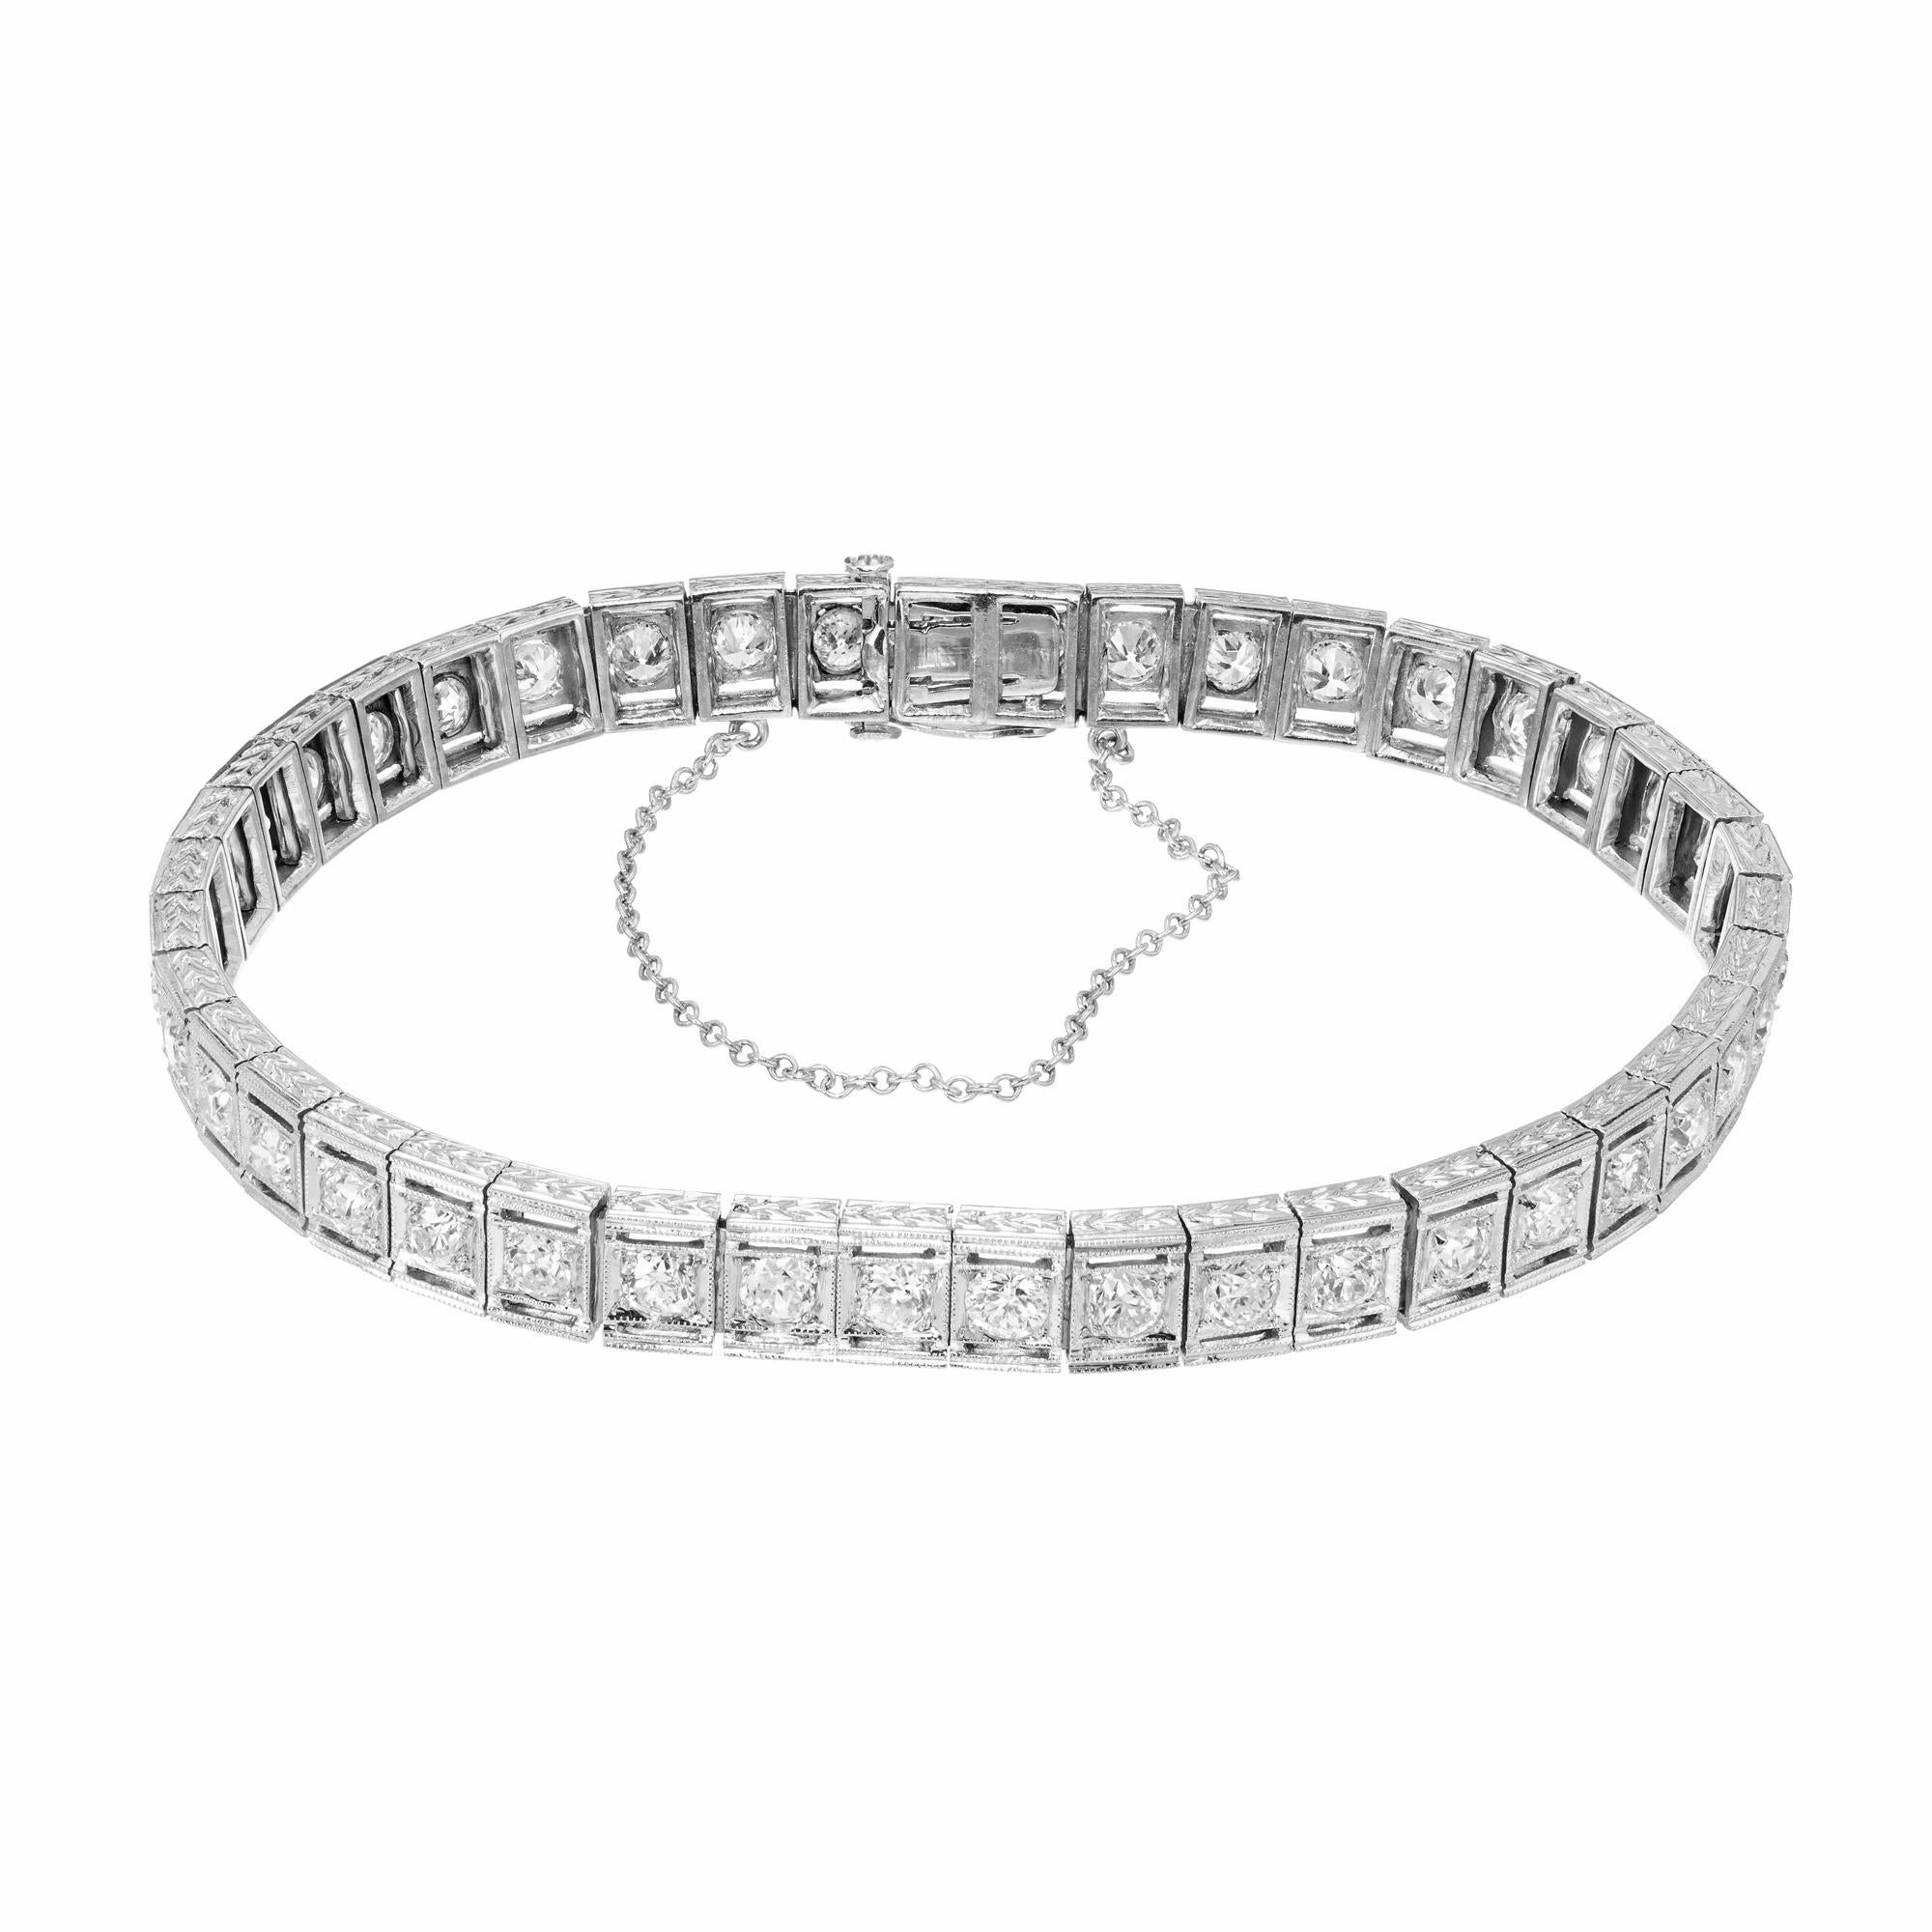 Diamond tennis bracelet. 42 round cut diamonds totaling 3.36cts that are set in platinum engraved squares. The diamonds have nice brilliance and are mounted solidly into each square that are linked together frame by frame. The catch is secure and is